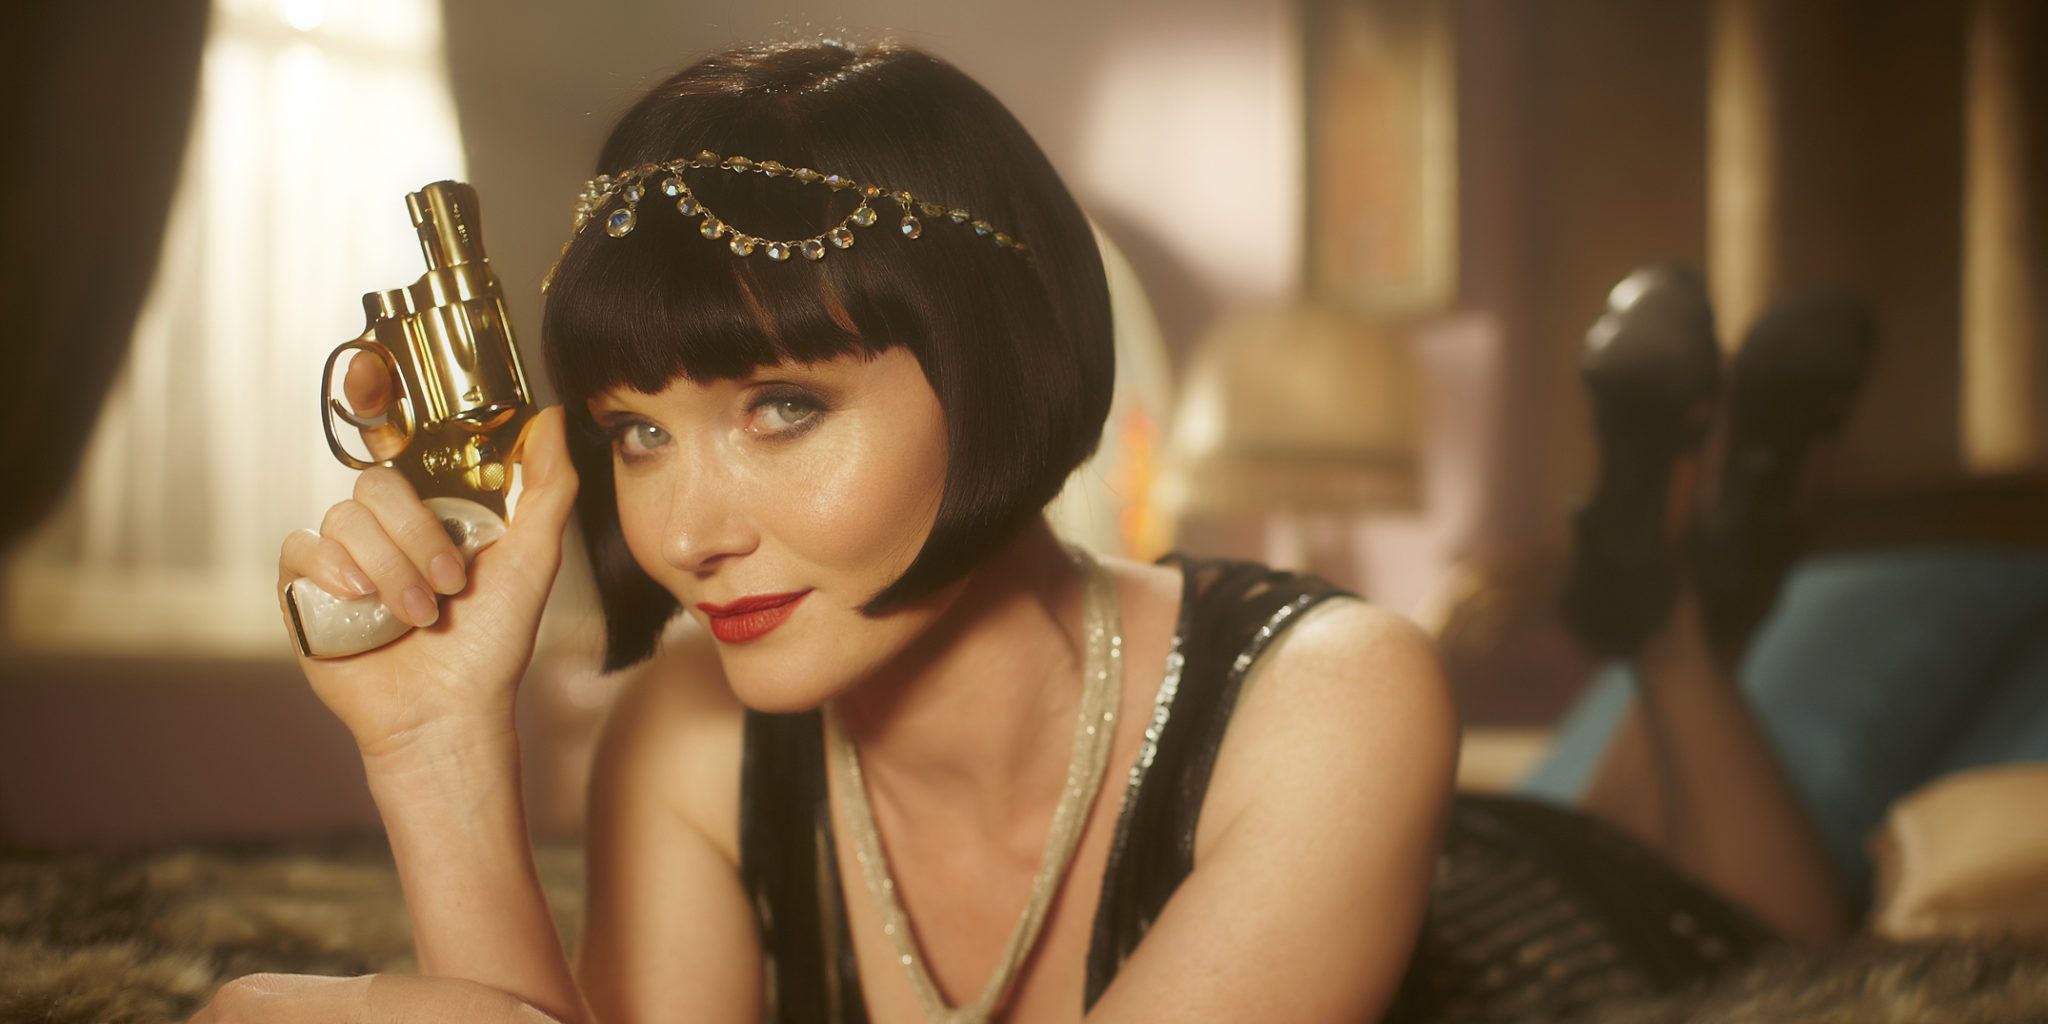 A young woman smiling while holding a golden gun in Miss Fisher's Murder Mysteries.